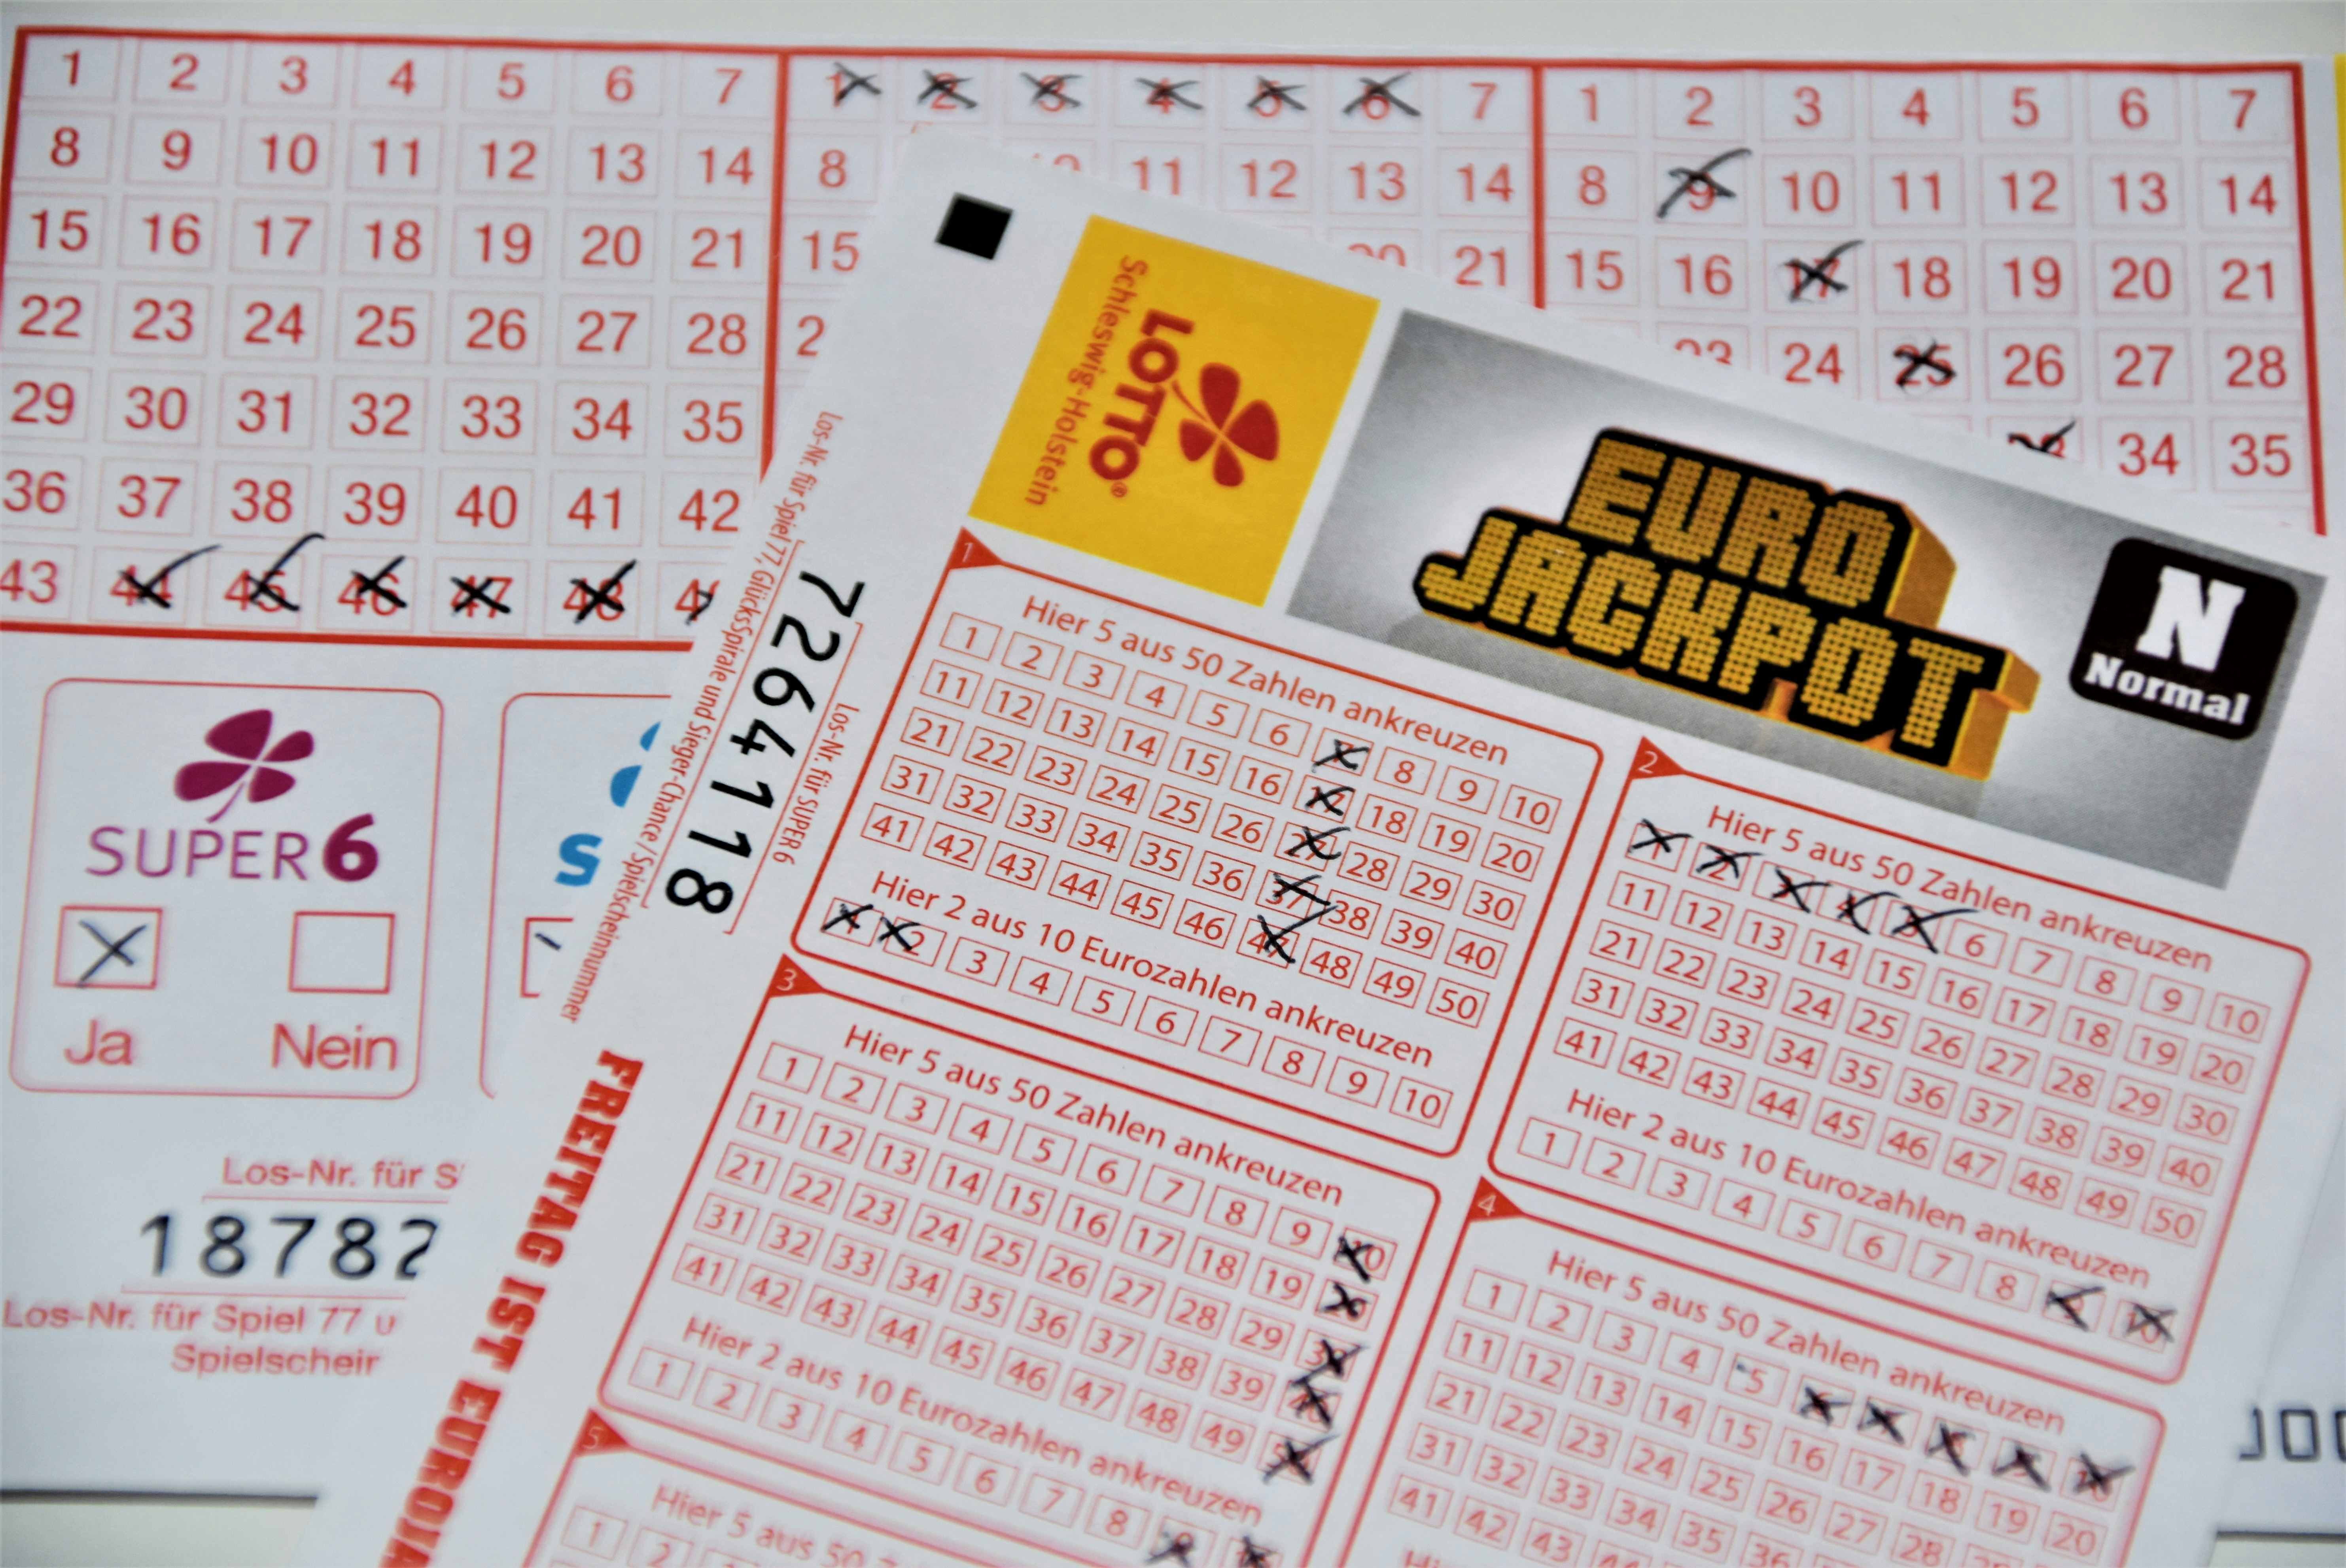 Euro Jackpot lottery, choose the right numbers